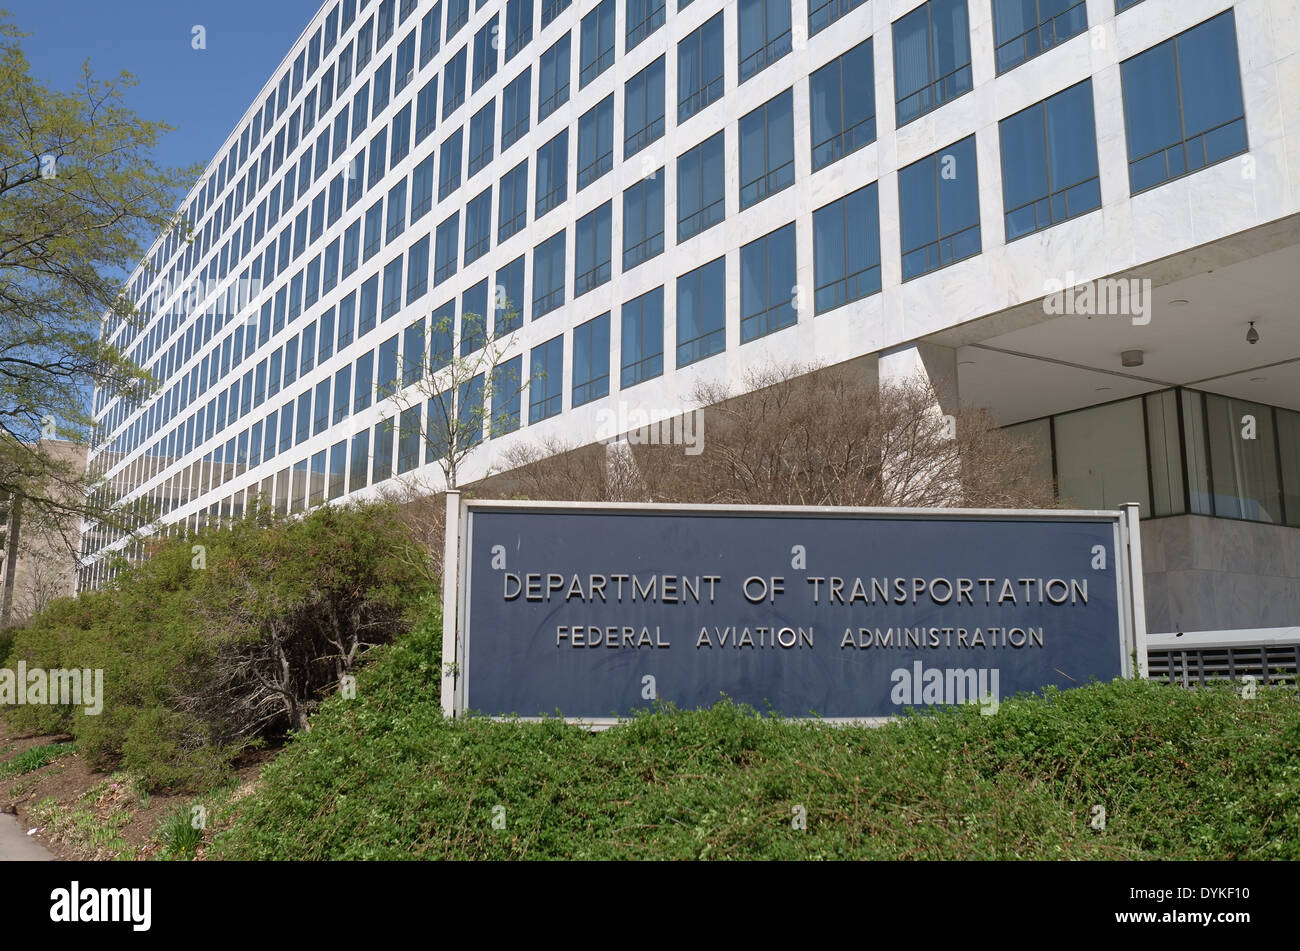 United States Department of Transportation Building Federal Aviation Administration Stock Photo